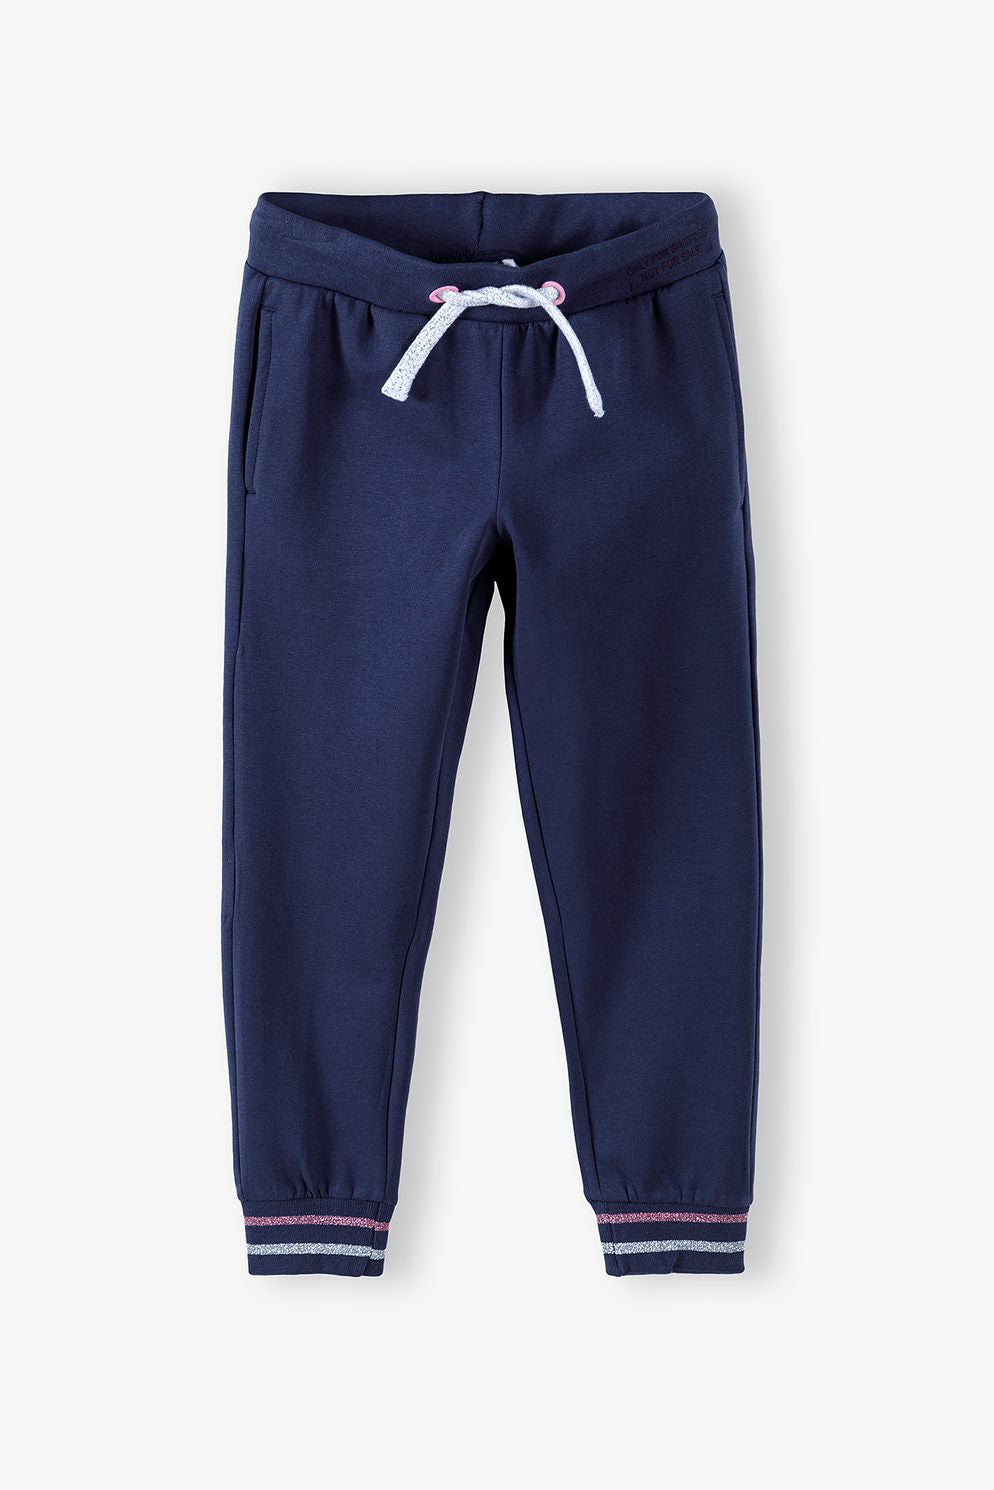 Girls' navy blue tracksuits